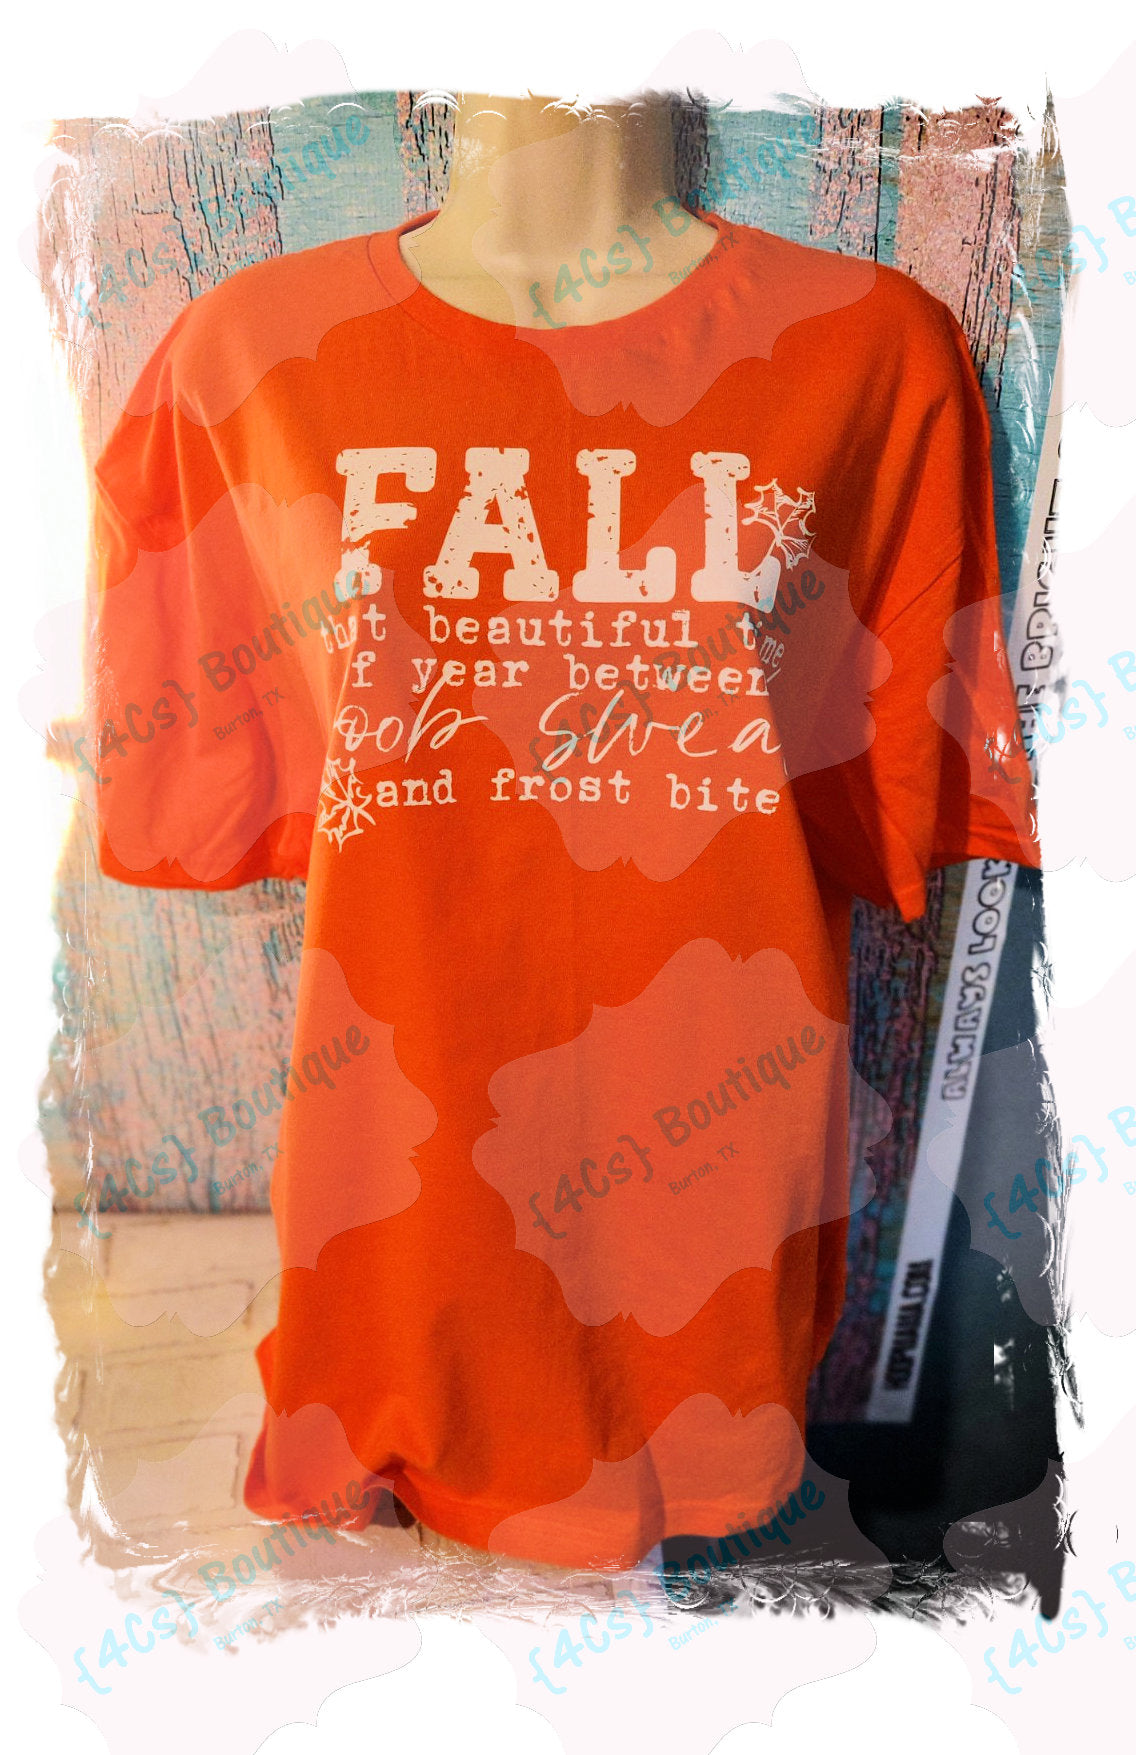 Fall That Beautiful Time Of Year Between Boob Sweat and Frost Bite Shirt